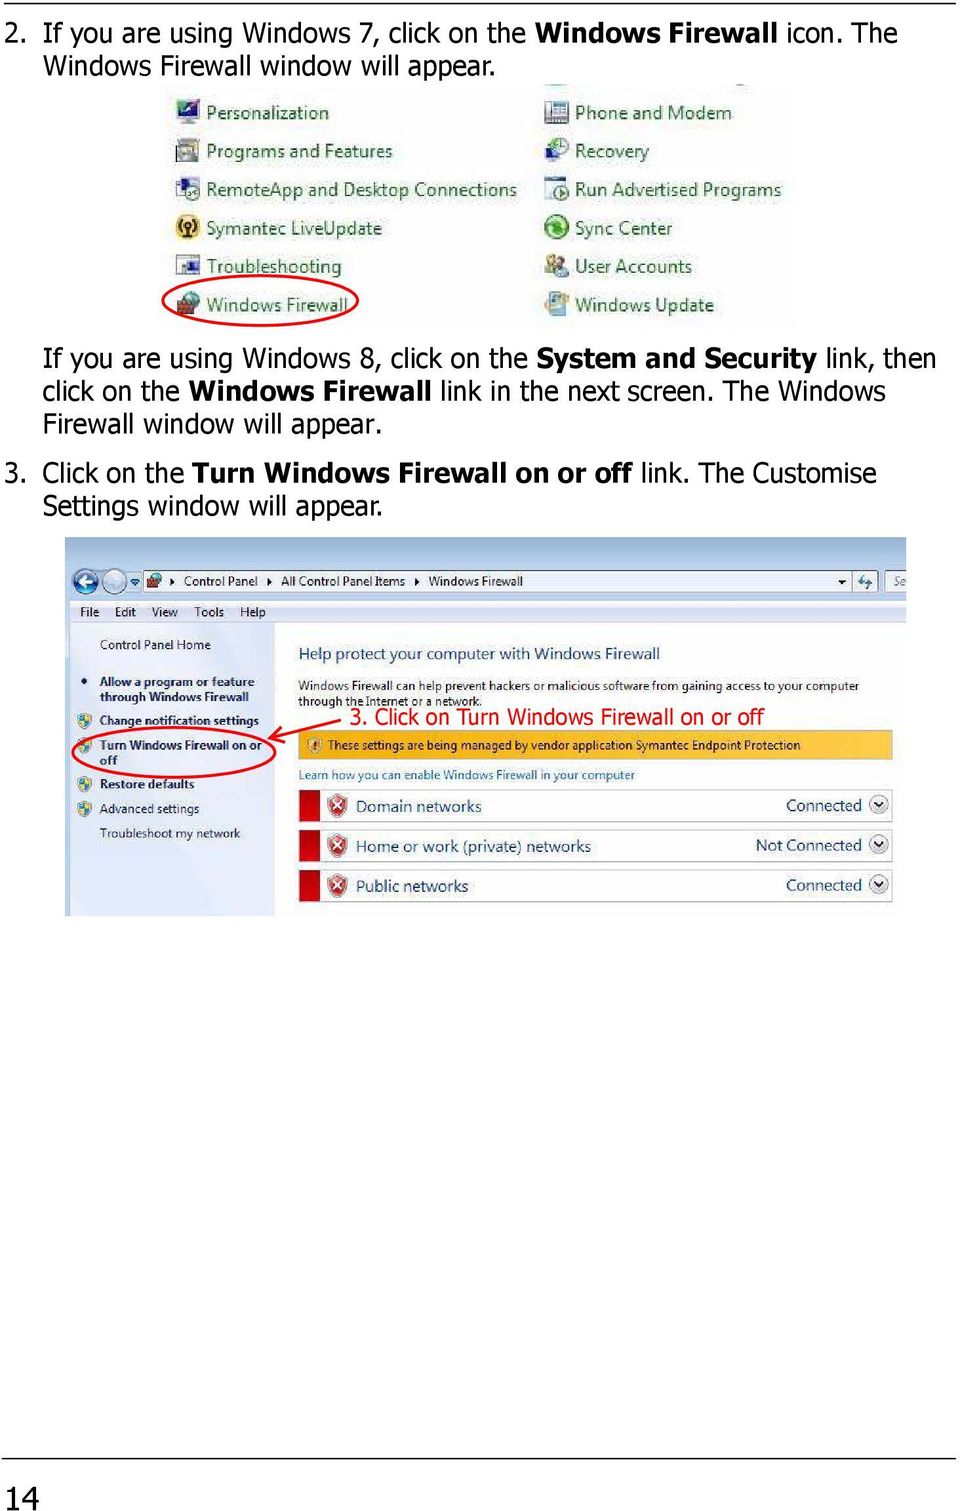 If you are using Windows 8, click on the System and Security link, then click on the Windows Firewall